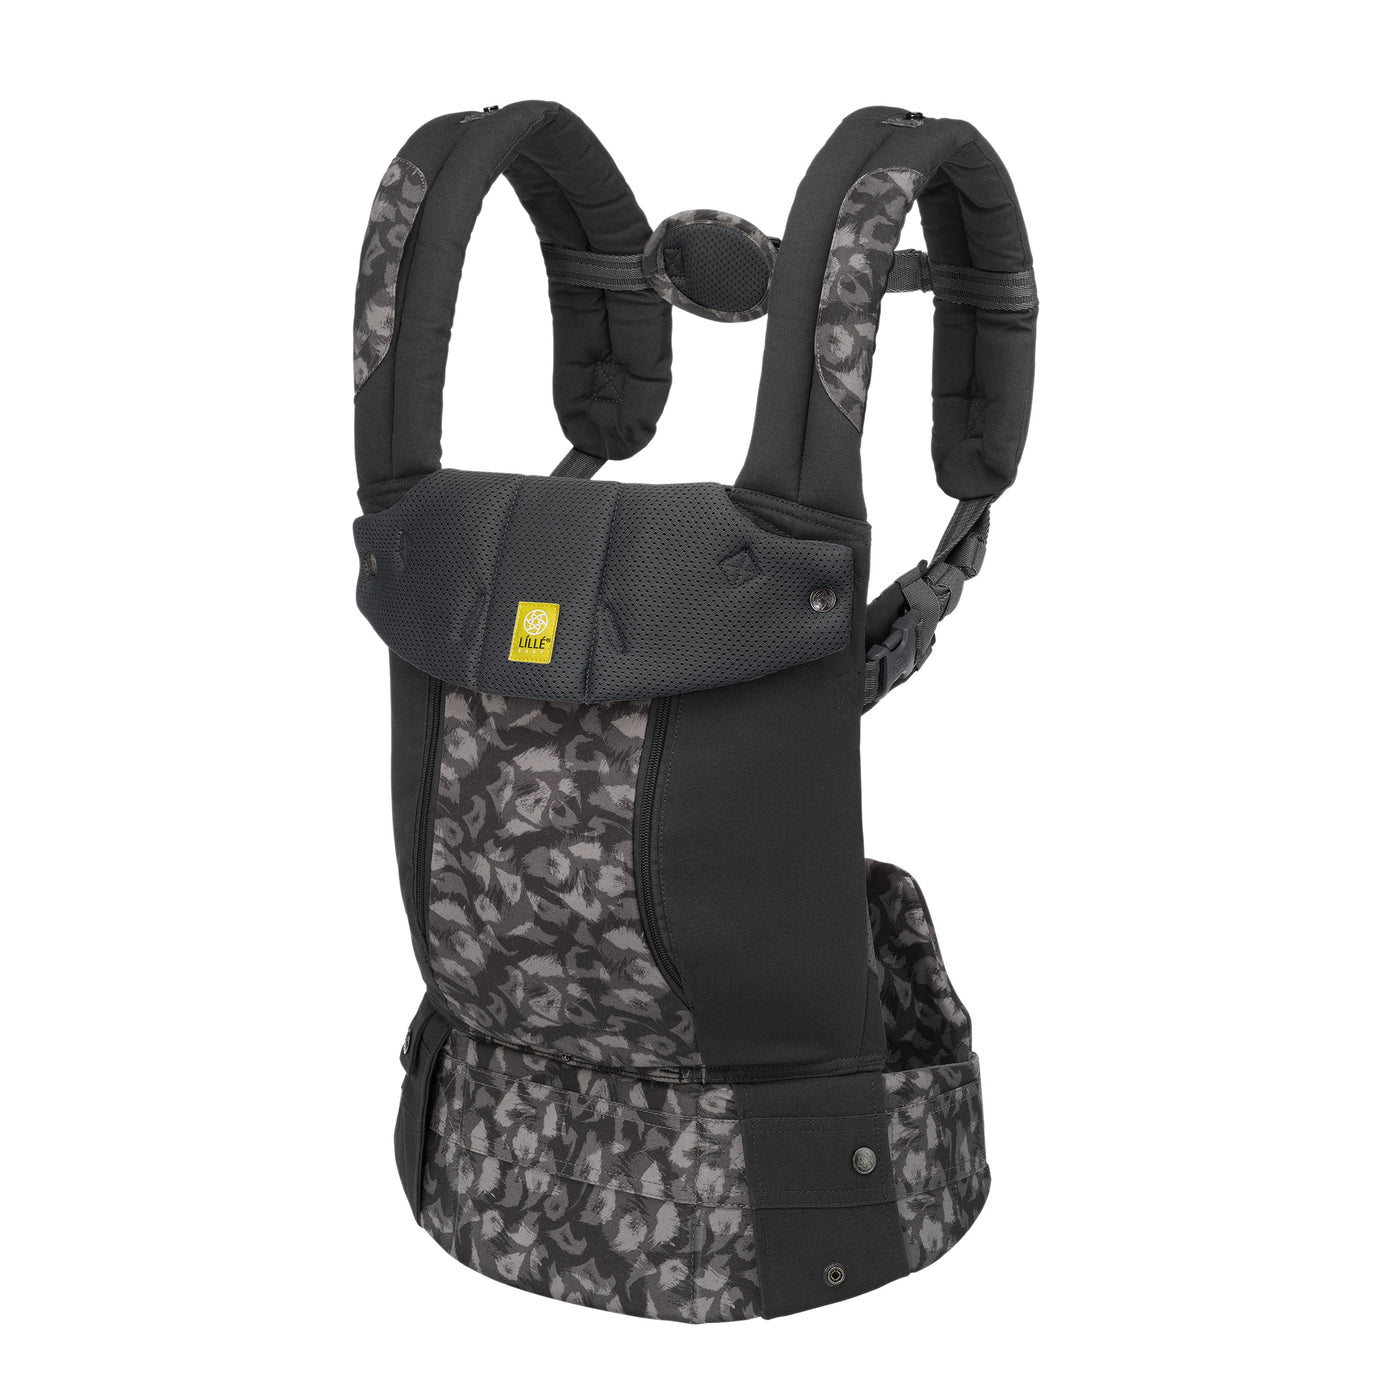 COMPLETE All Seasons Baby Carrier - Twilight Leopard